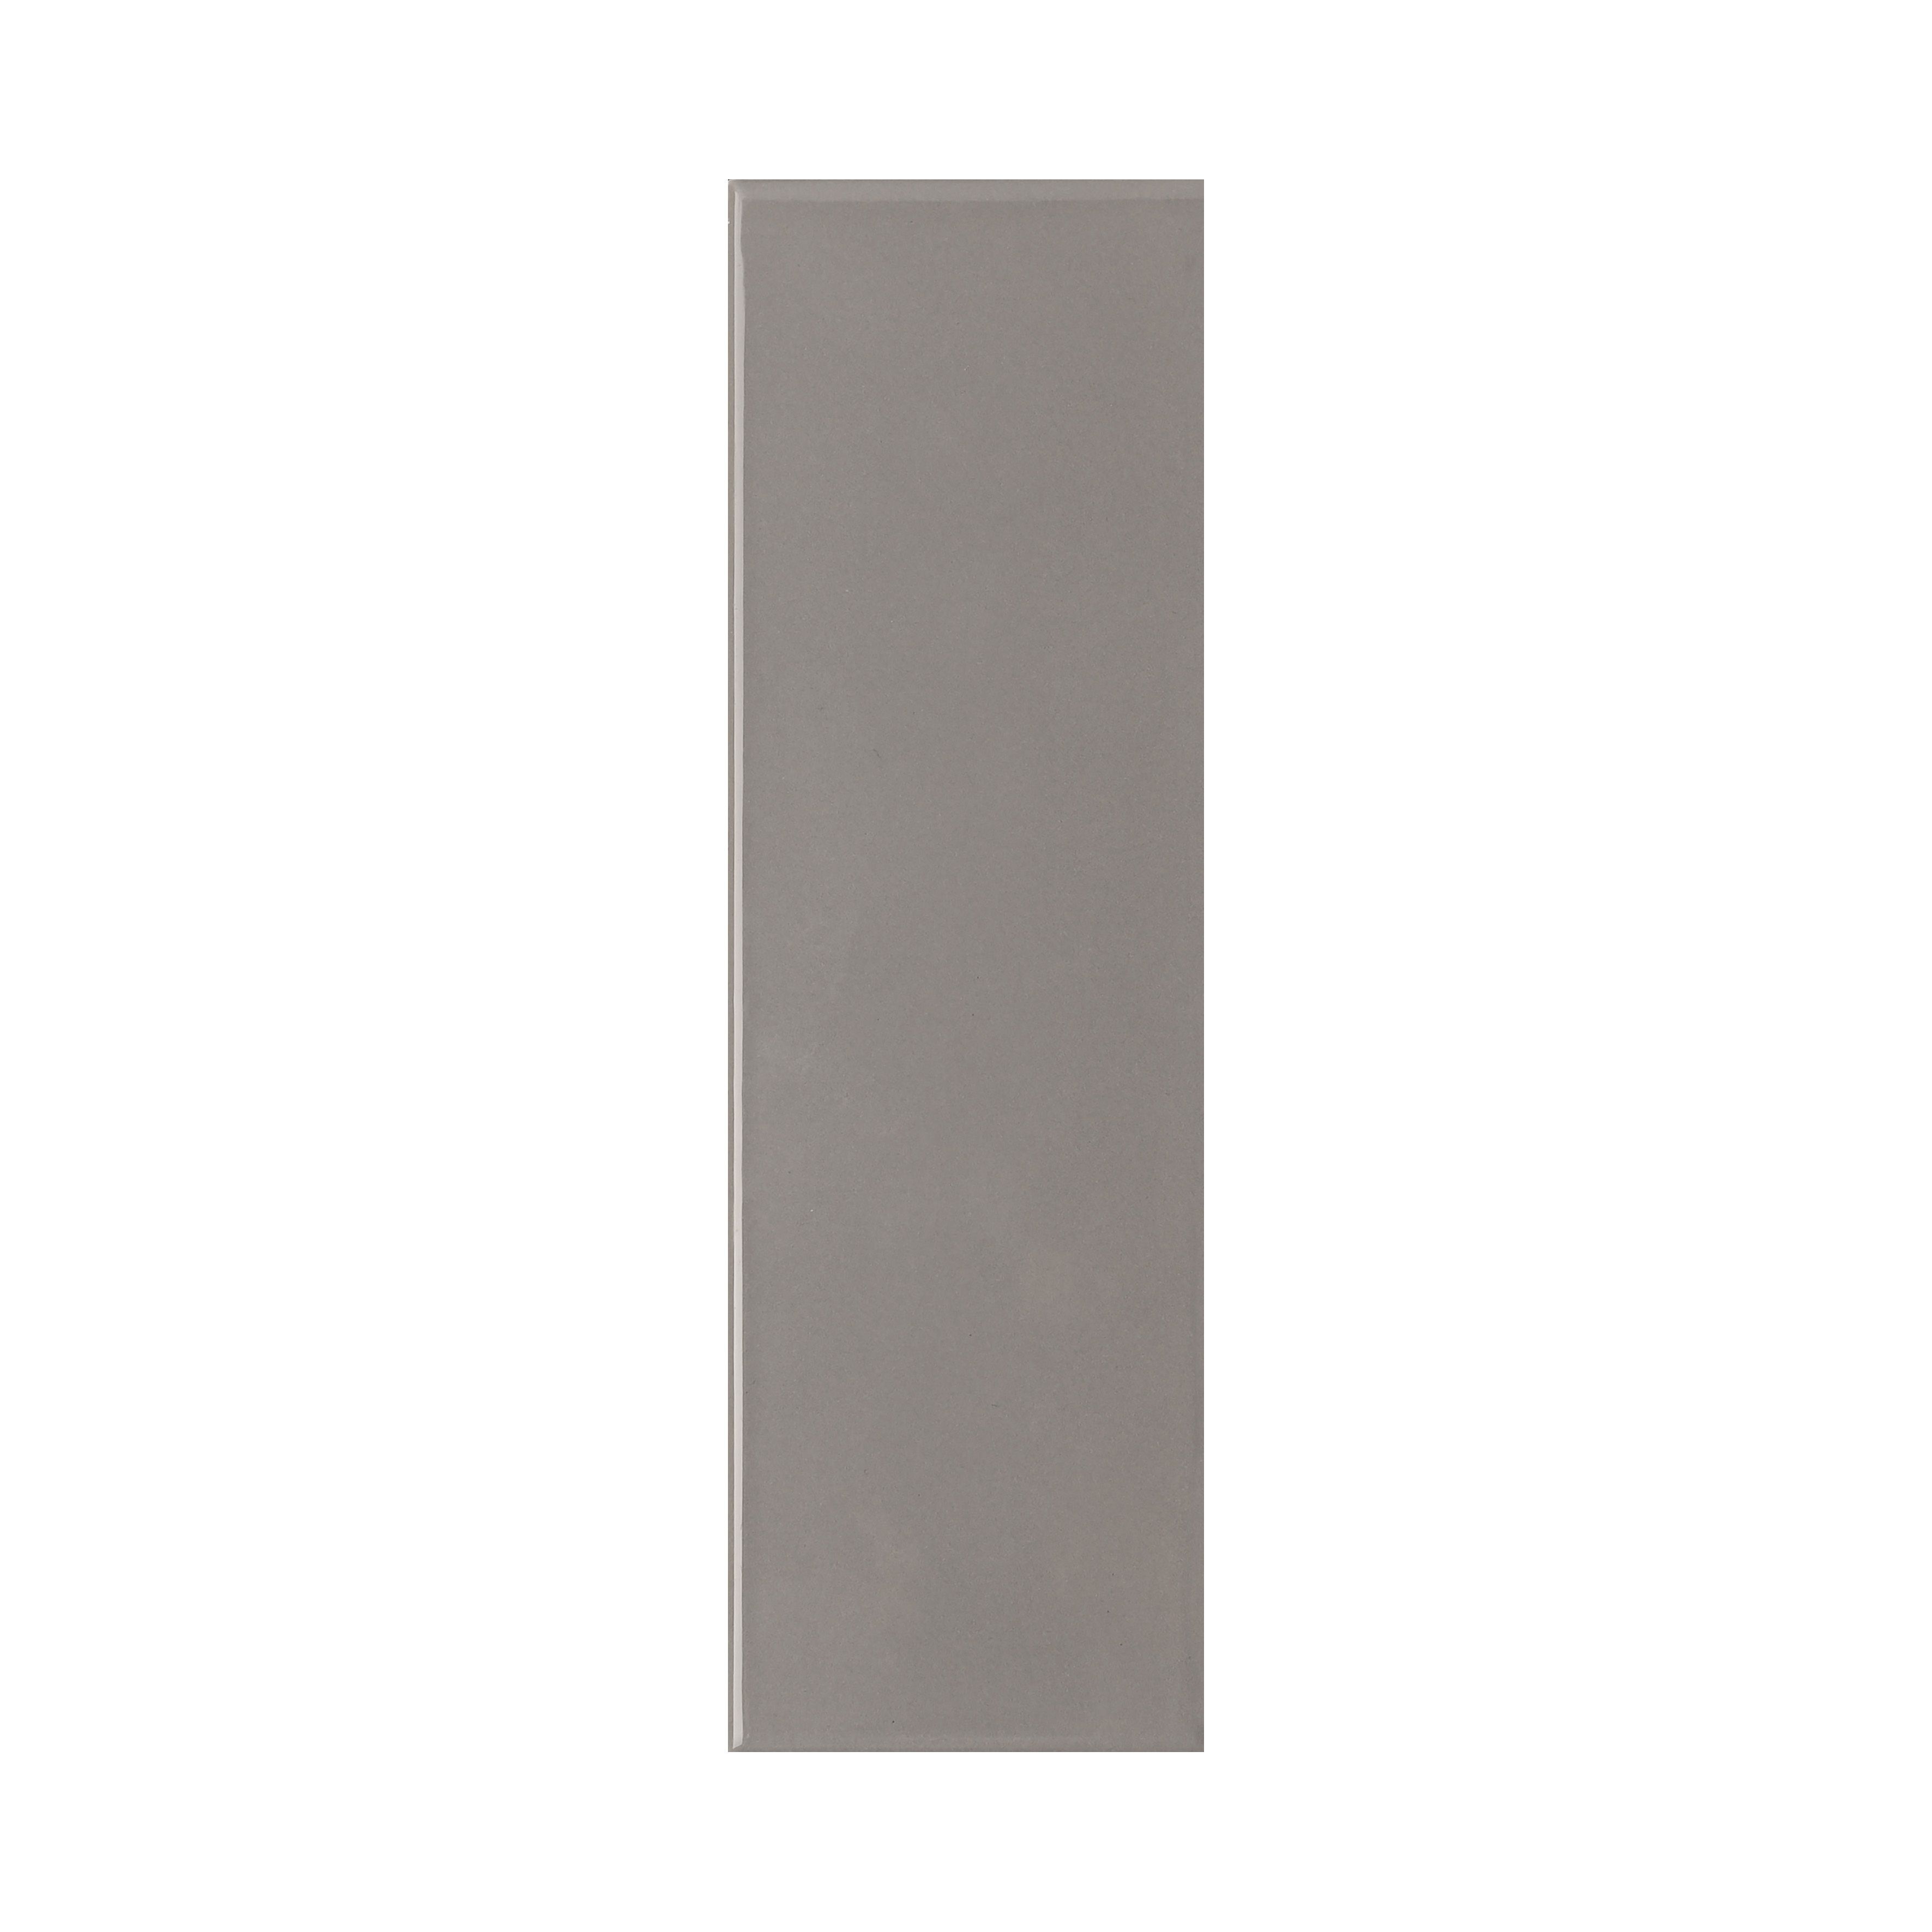 Tangier Grey Gloss Ceramic Wall Tile, Pack of 54, (L)245mm (W)75mm